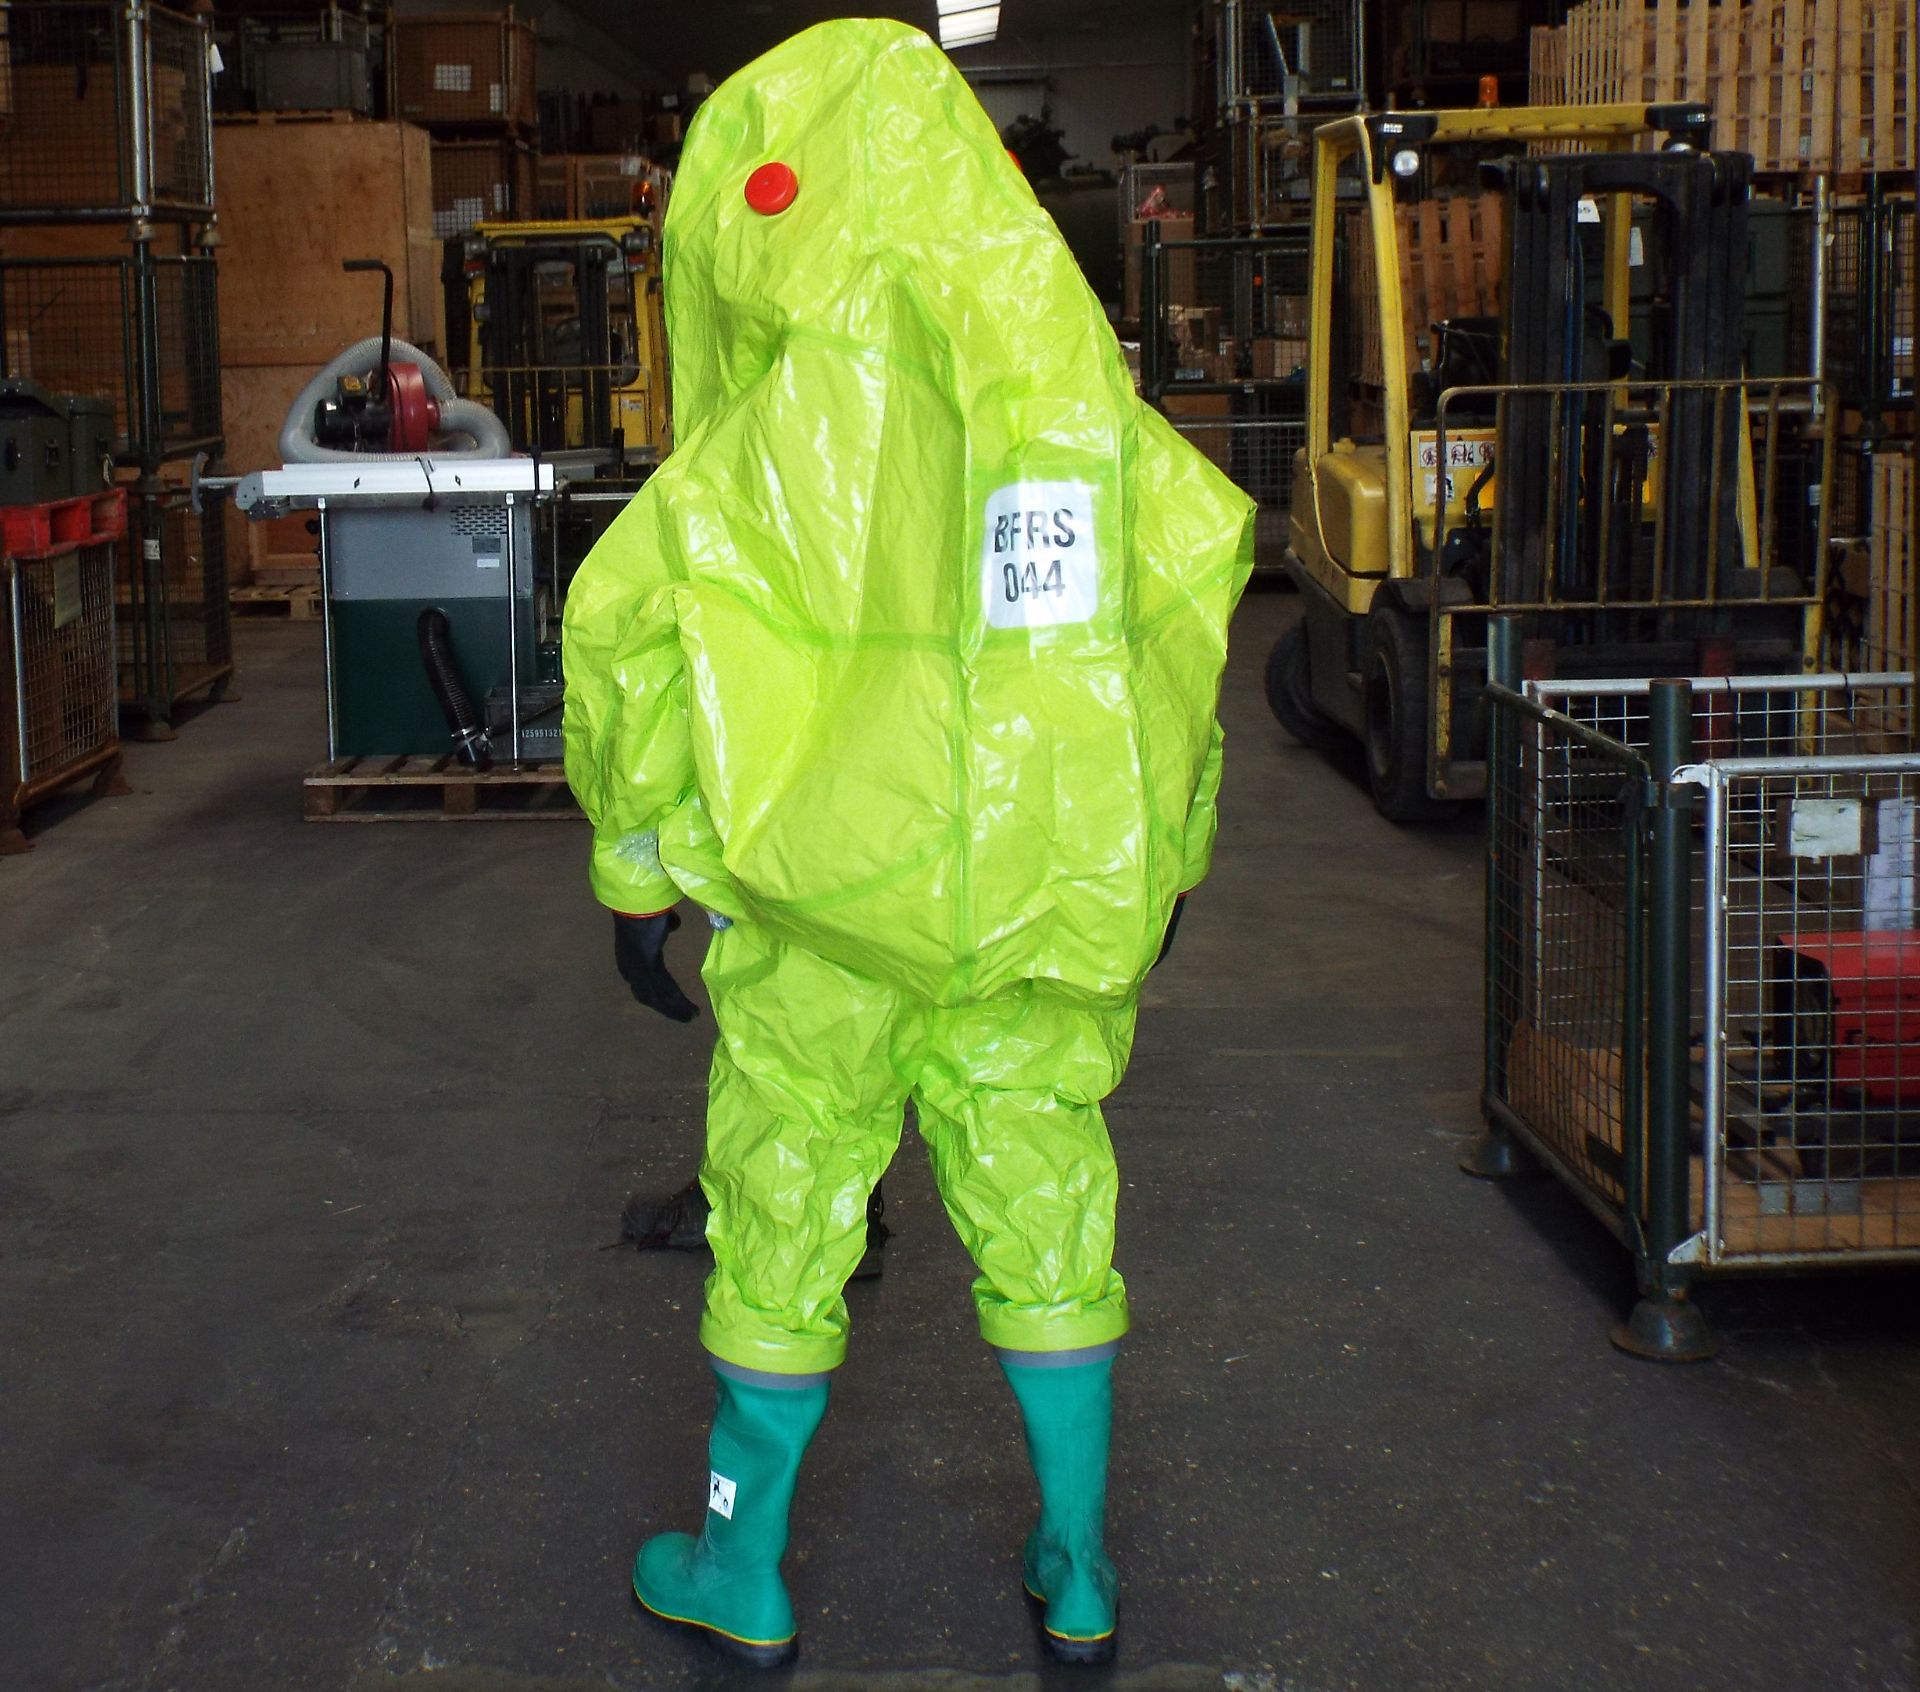 Respirex Tychem TK Gas-Tight Hazmat Suit Type 1A with Attached Boots and Gloves - Image 3 of 12